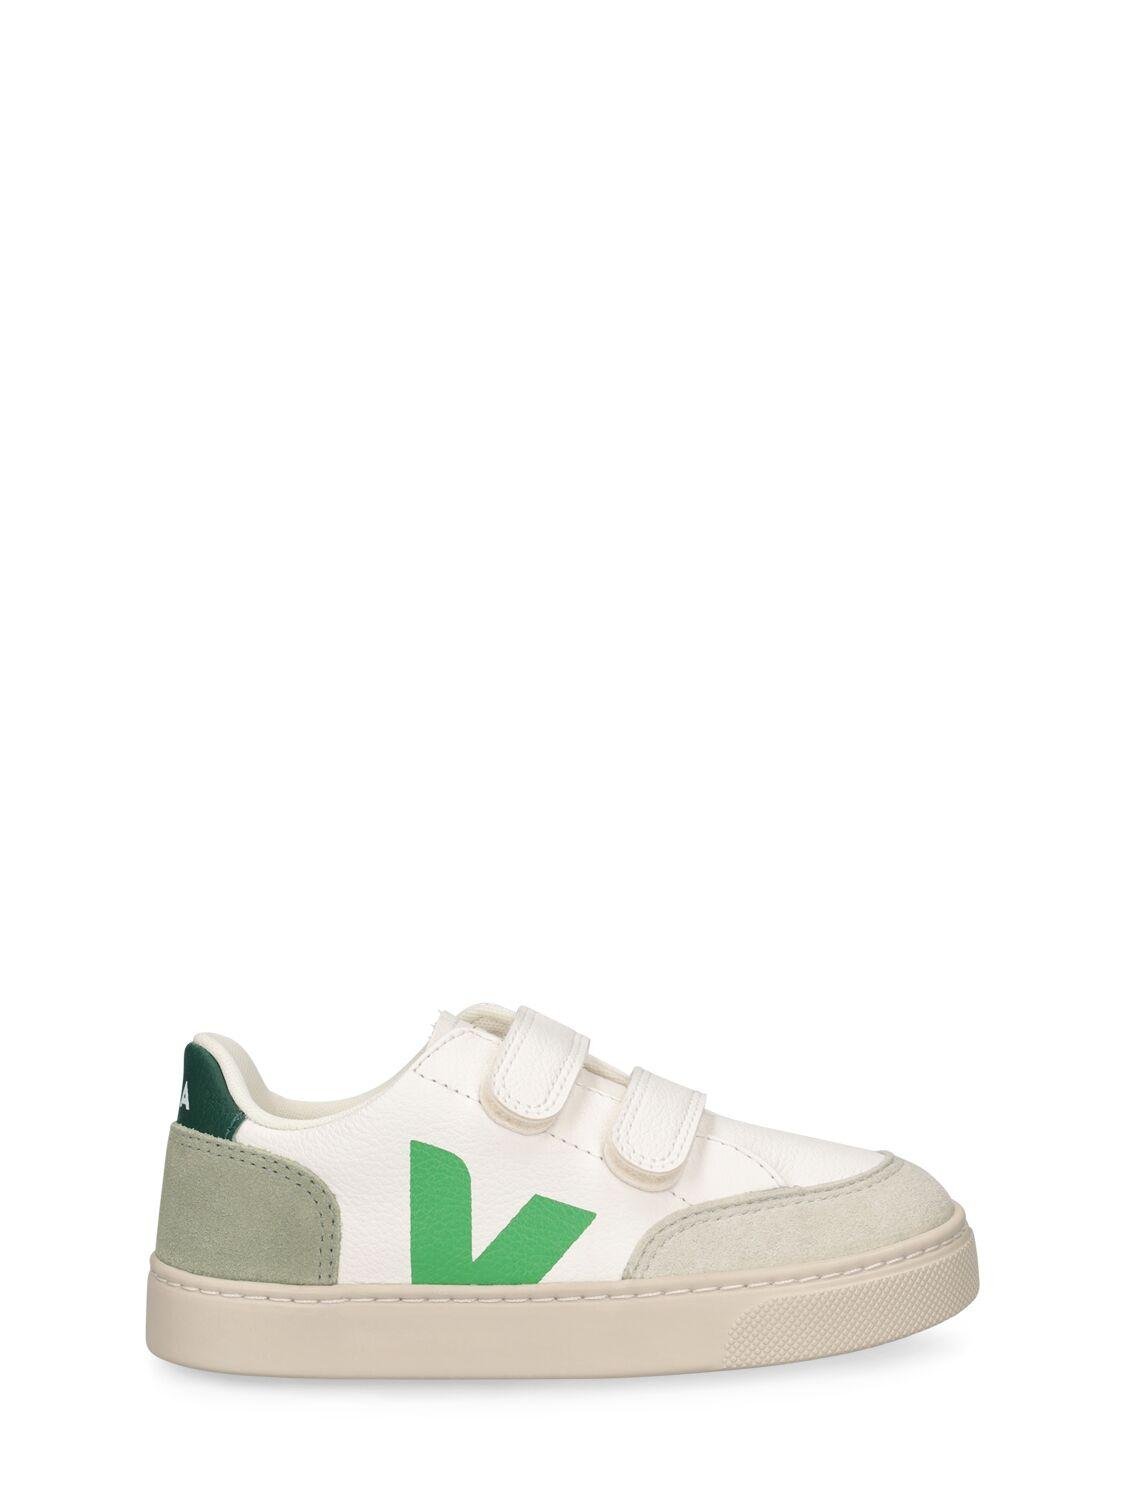 V-12 Chrome-free Leather Strap Sneakers by VEJA